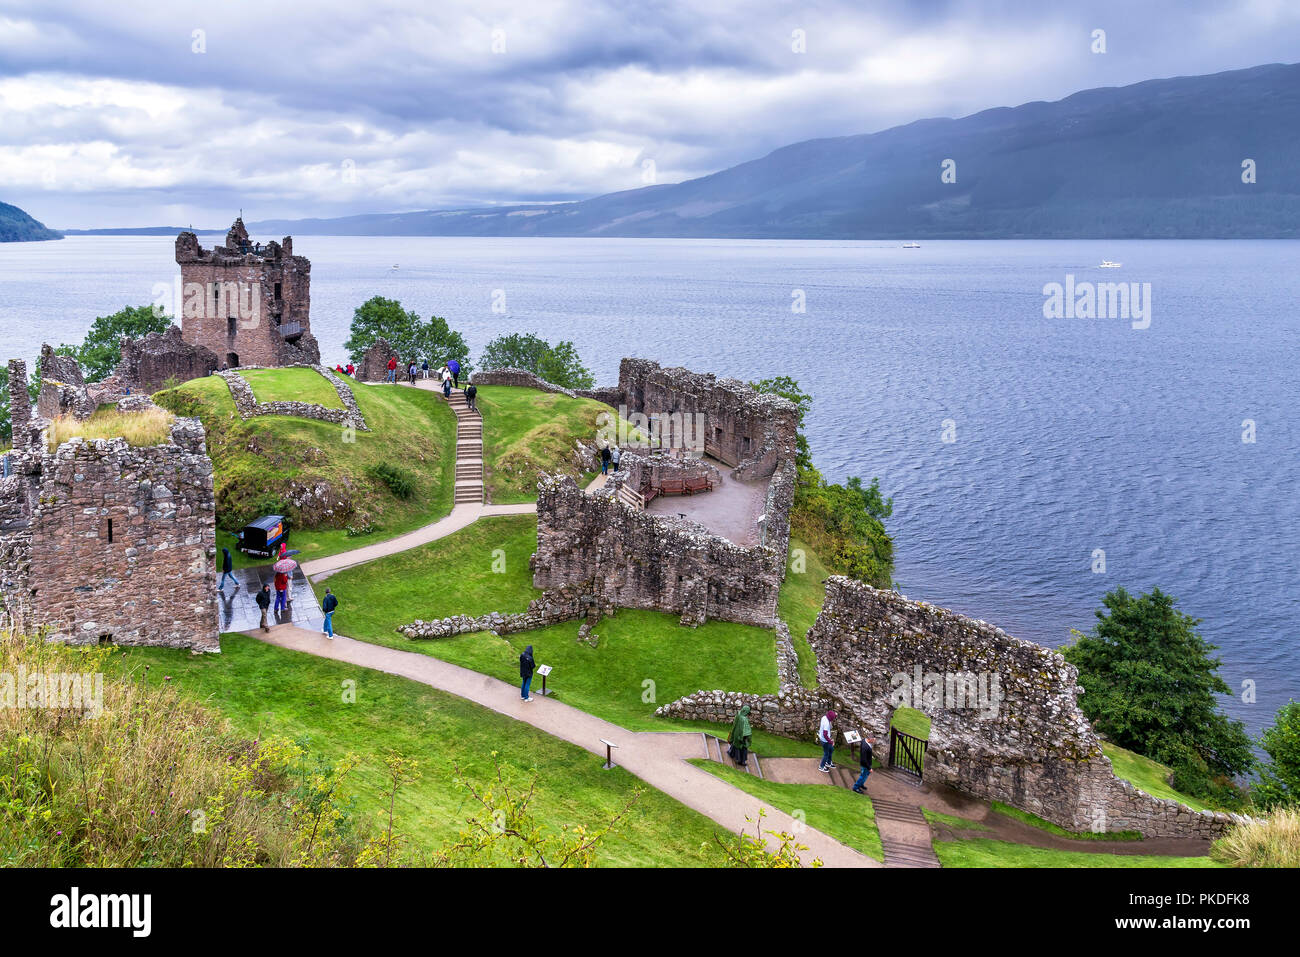 Drumnadrochit, United Kingdom - August 19, 2014: View of Urquhart Castle ruins beside Loch Ness, in the Highlands of Scotland Stock Photo